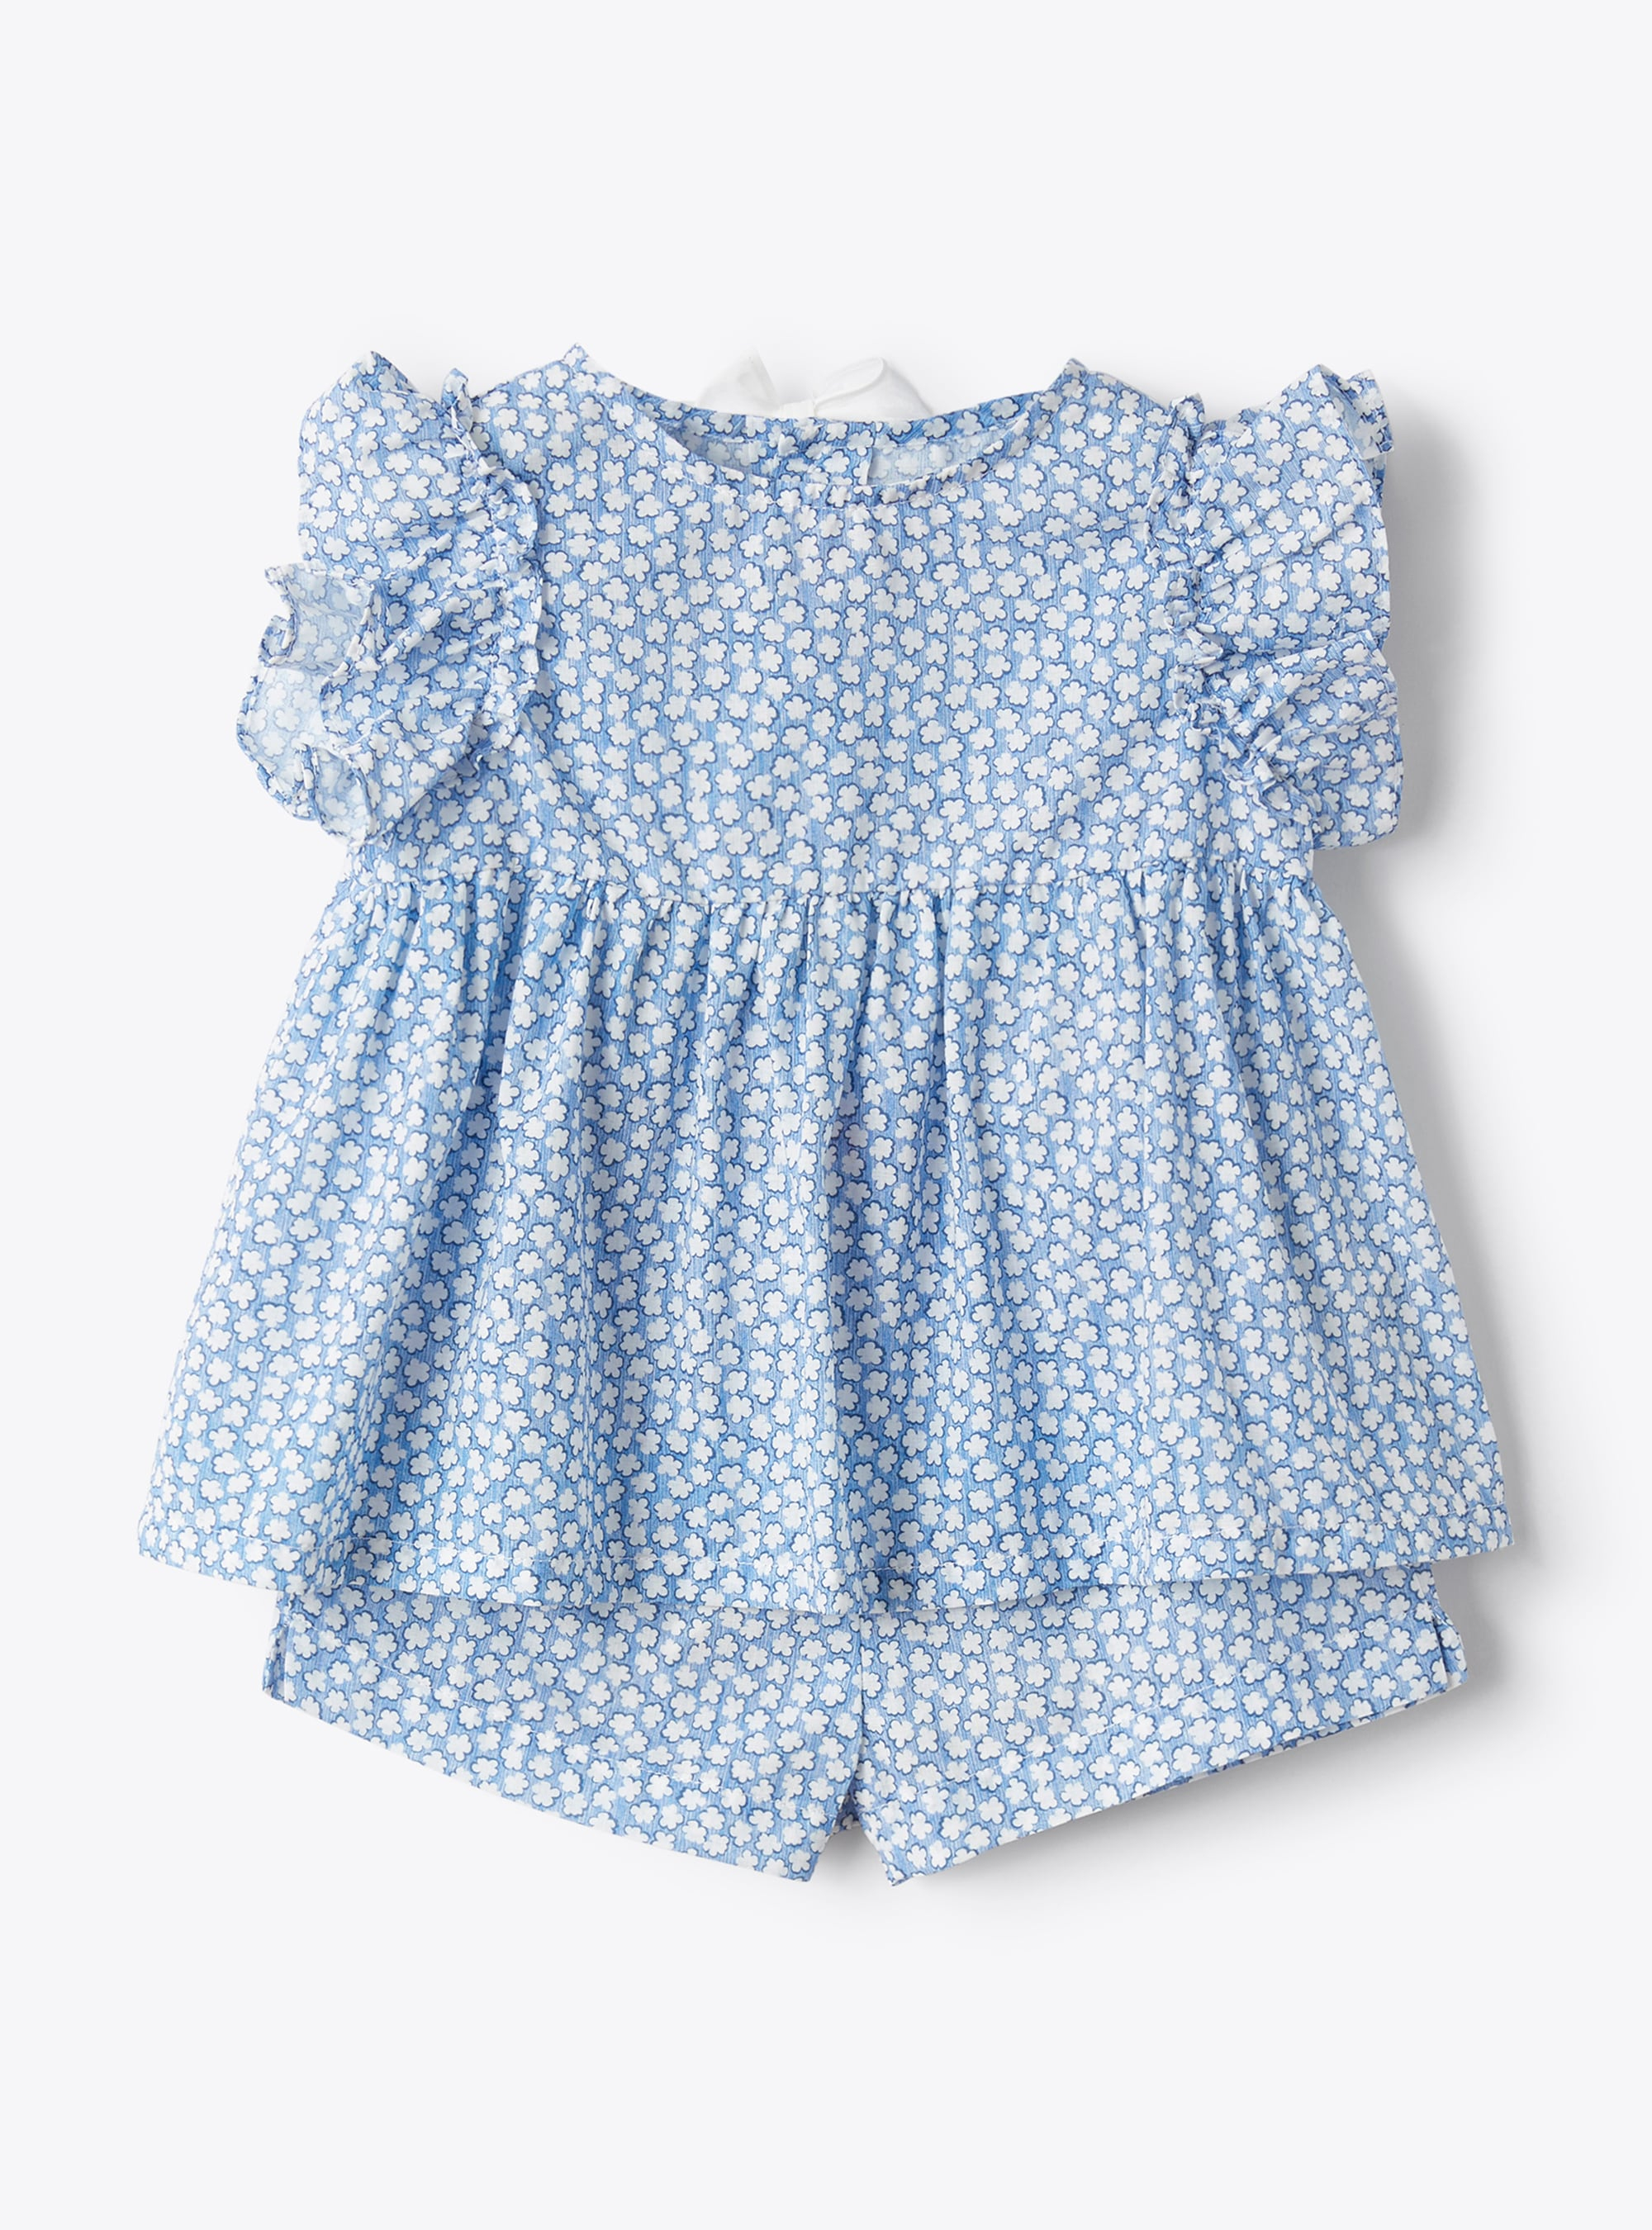 Two-piece set for baby girls with a floral print - COMPLETO DUE PEZZI - Il Gufo